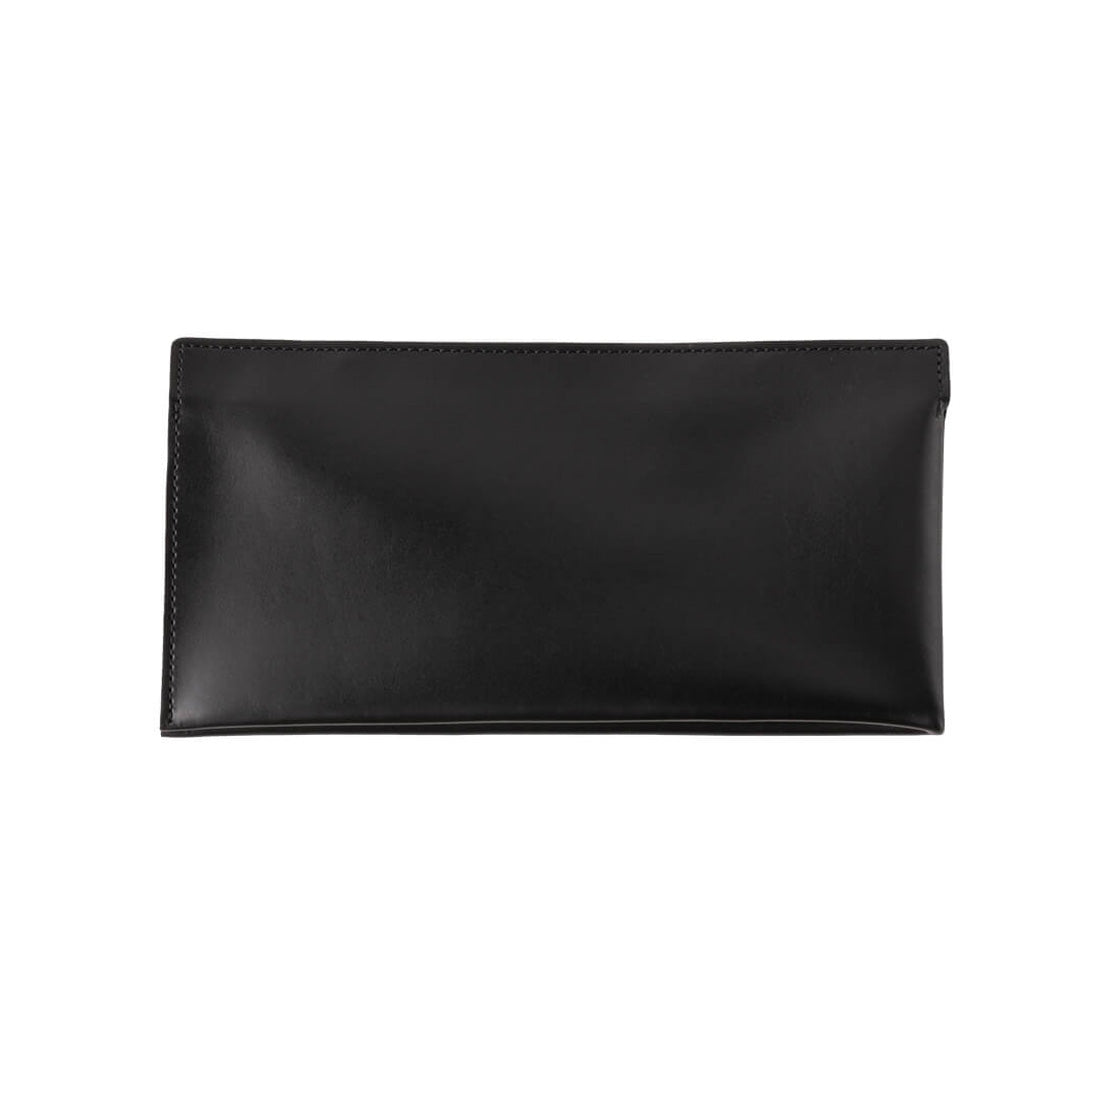 CDT SMALL LEATHER BLACK CASE